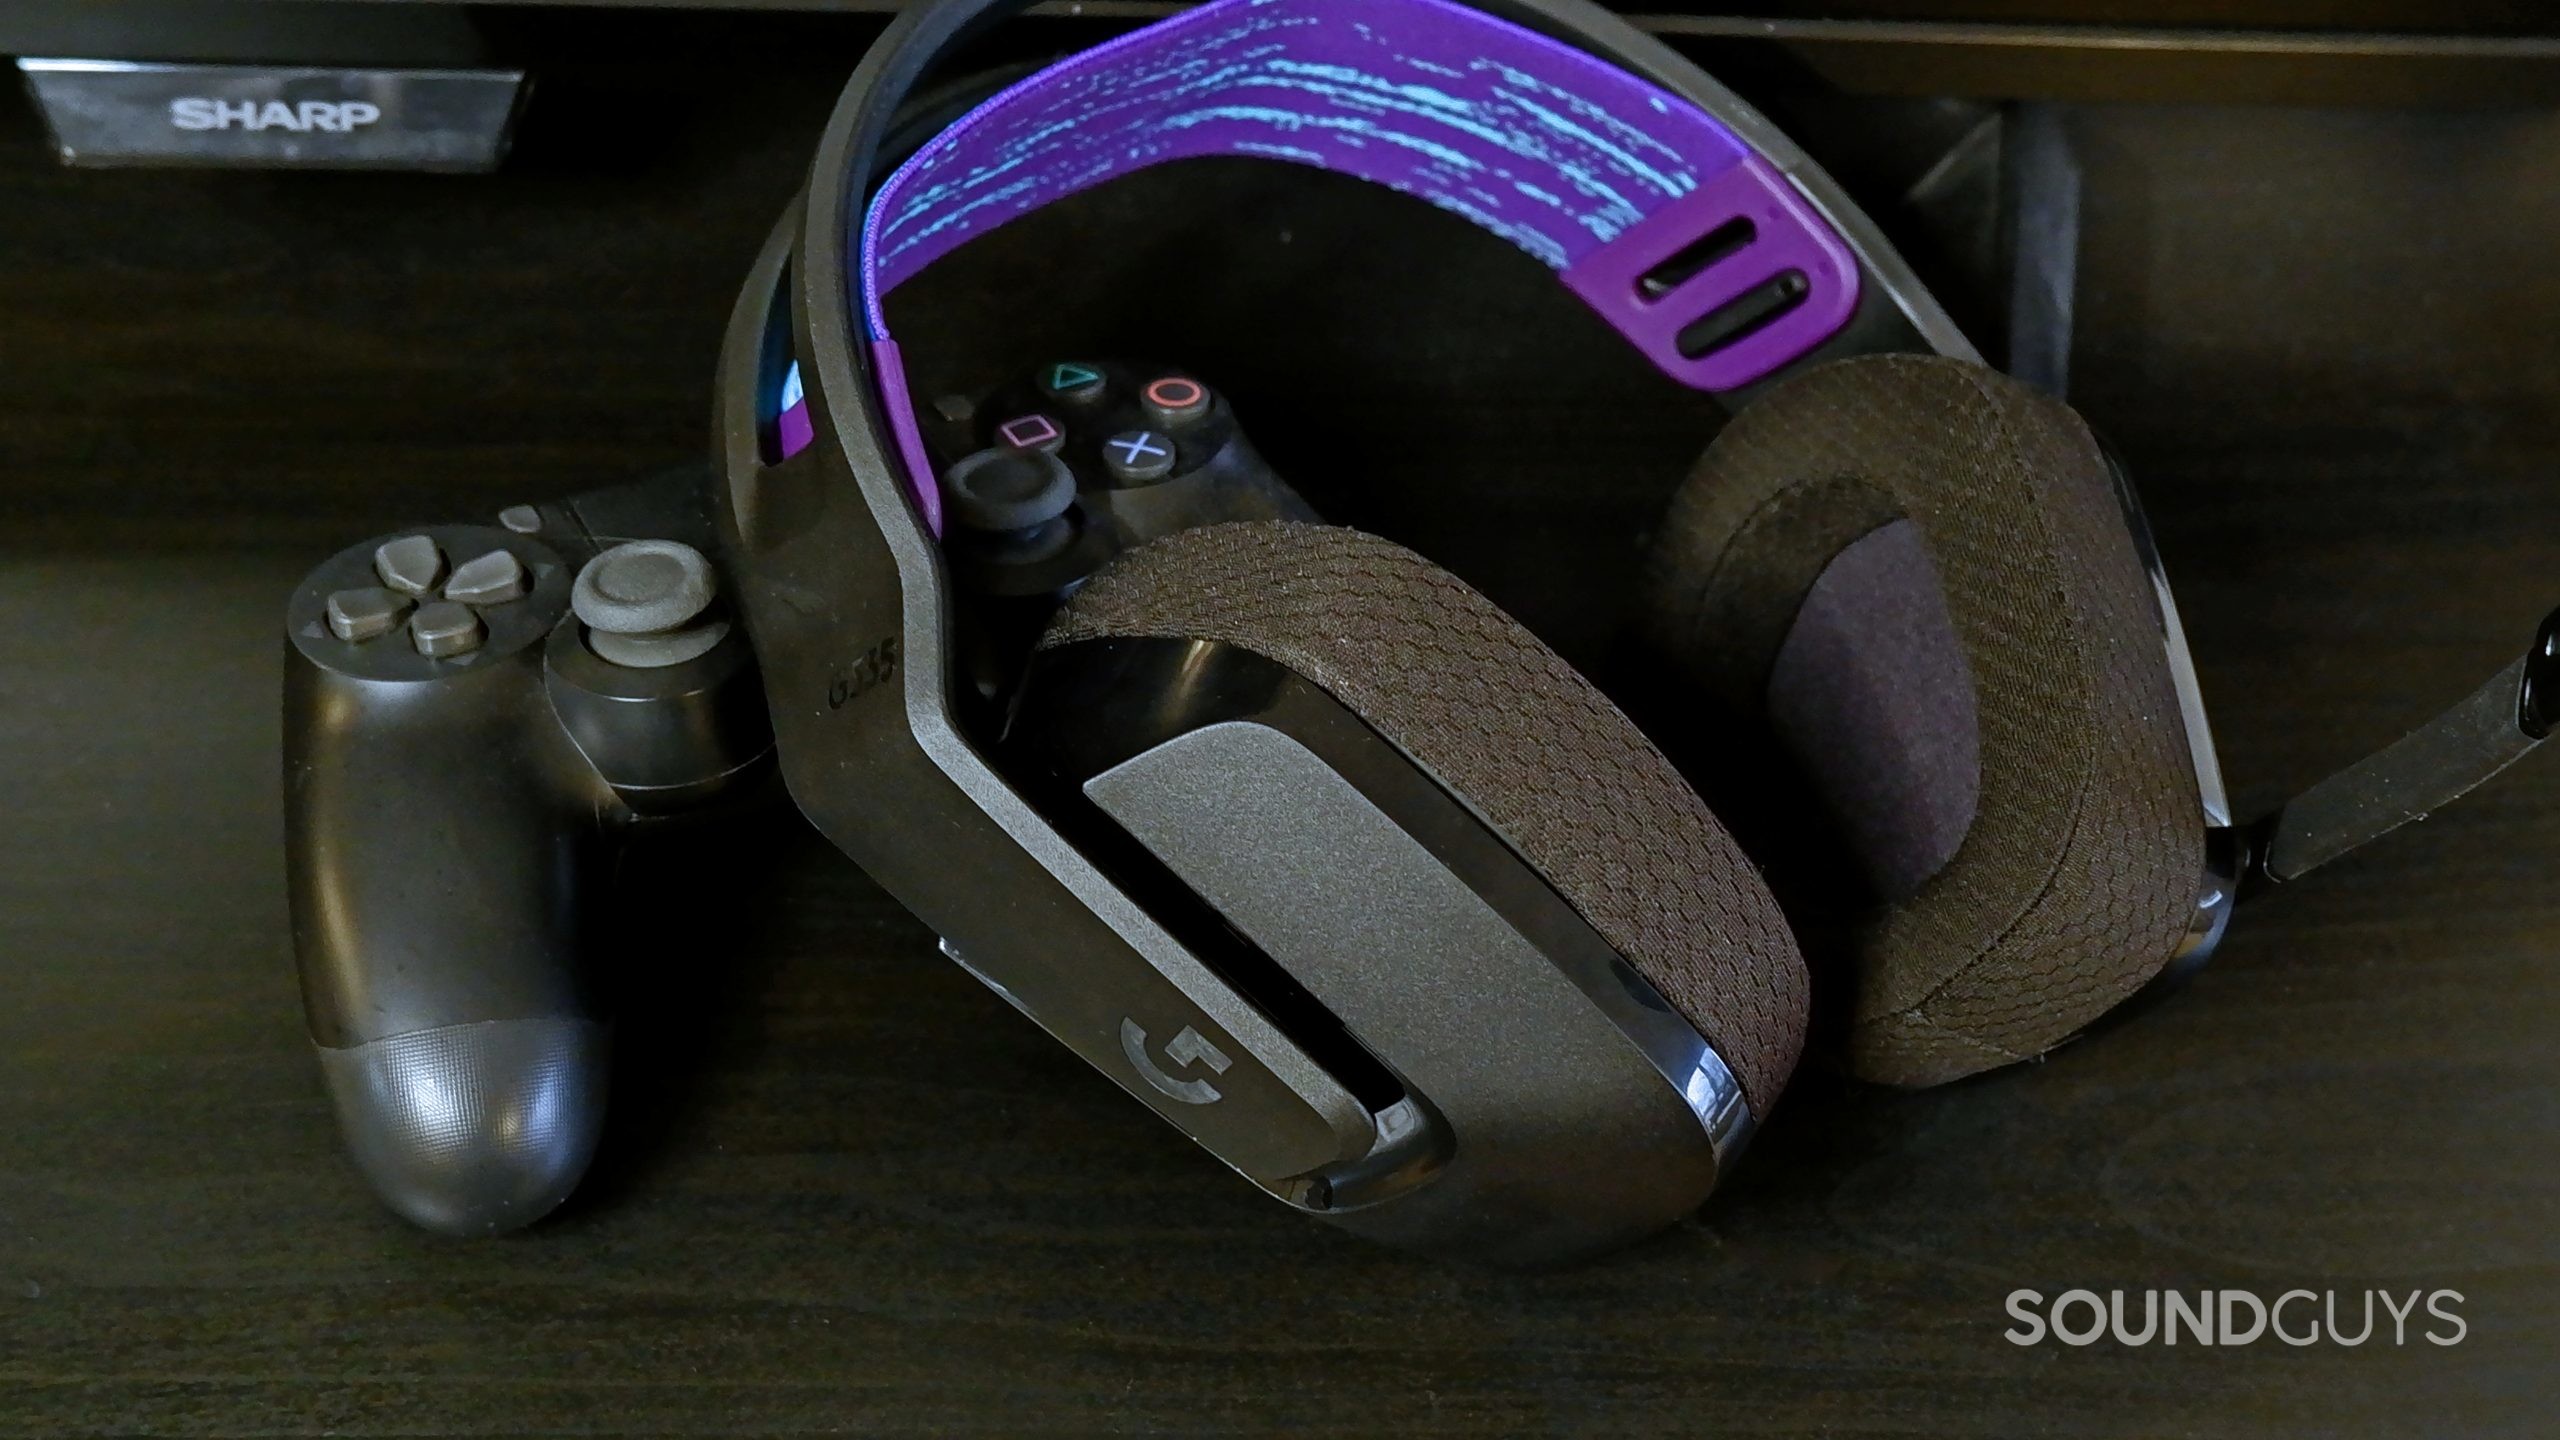 The Logitech G535 headset in front of a TV, resting on a PlayStation 4 controller.